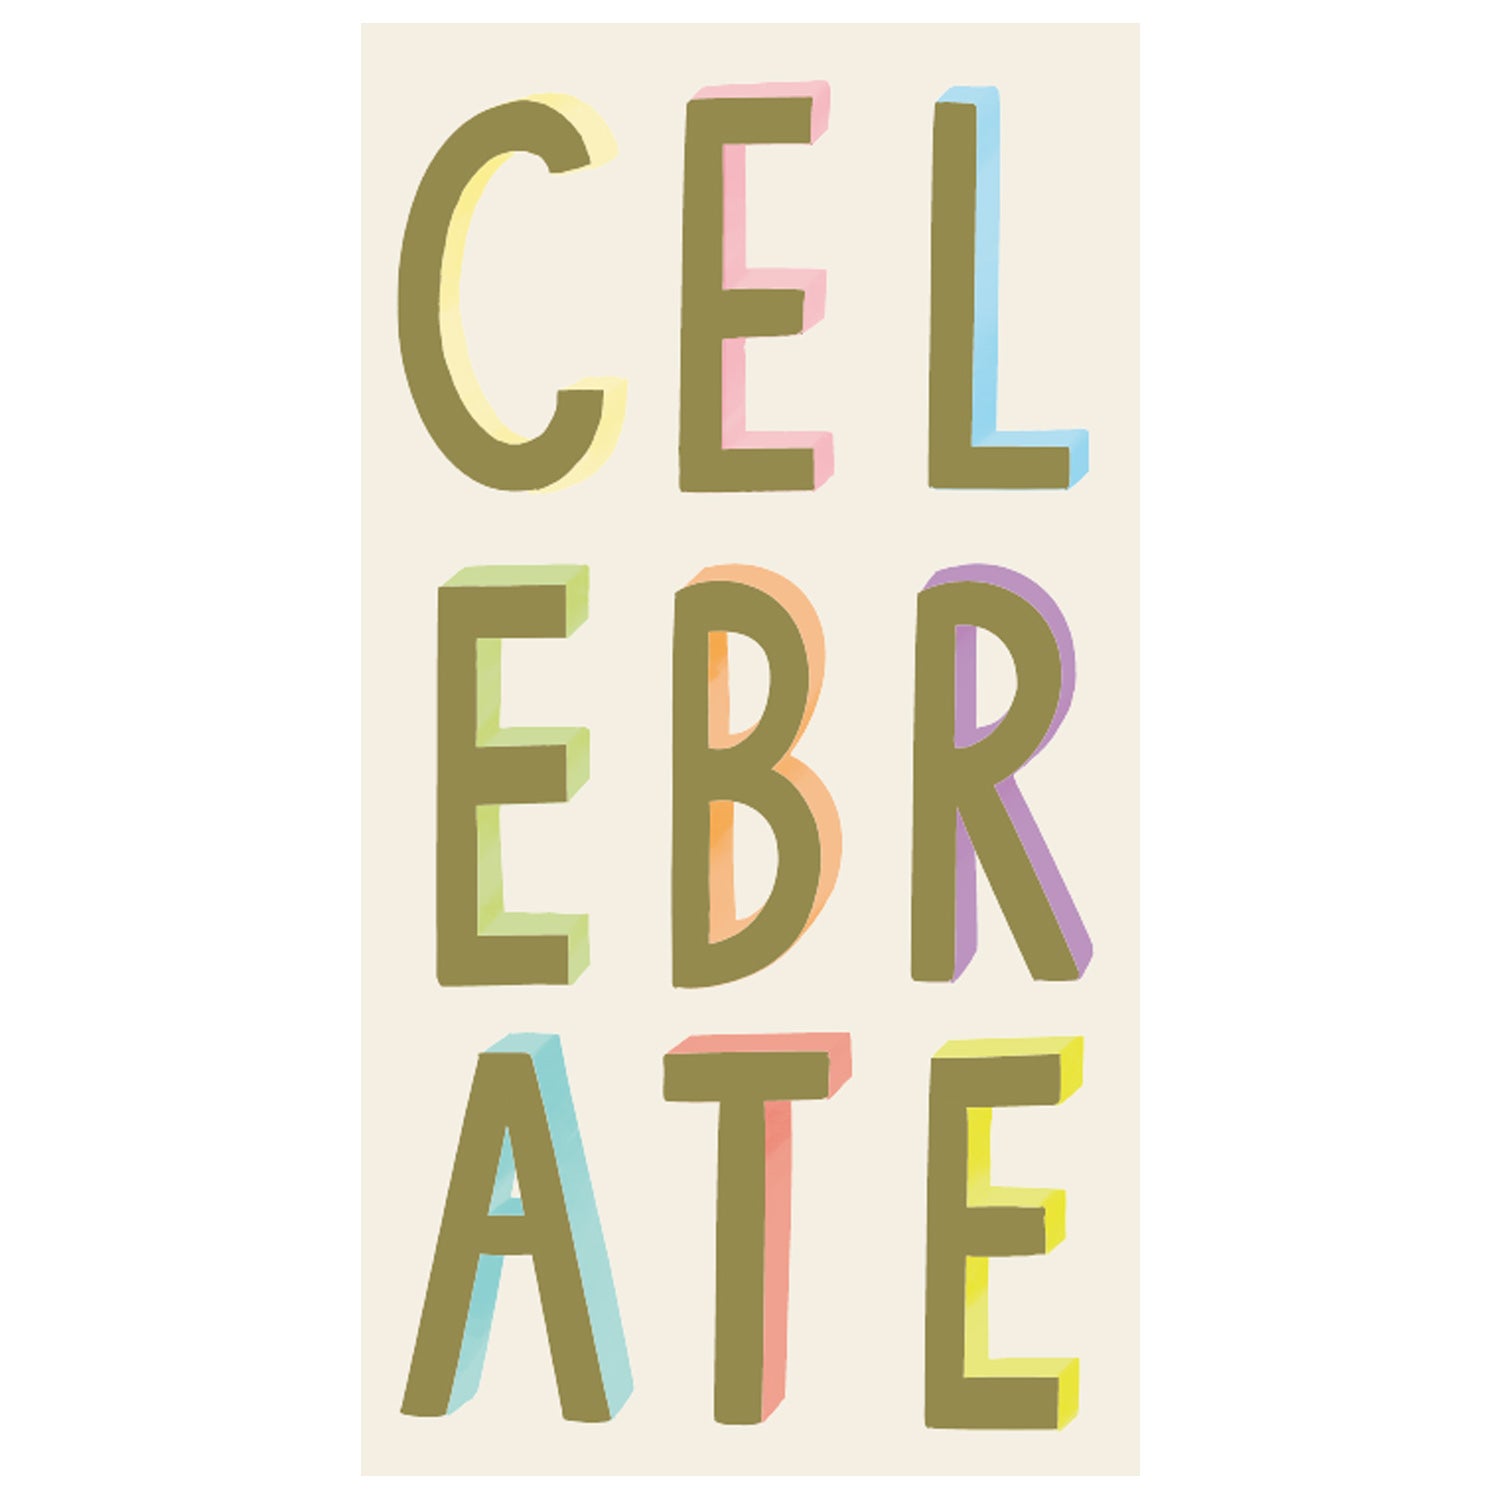 The word Celebrate is shown in a colorful font on a beige background, perfect for Hester &amp; Cook Celebrate Napkins.